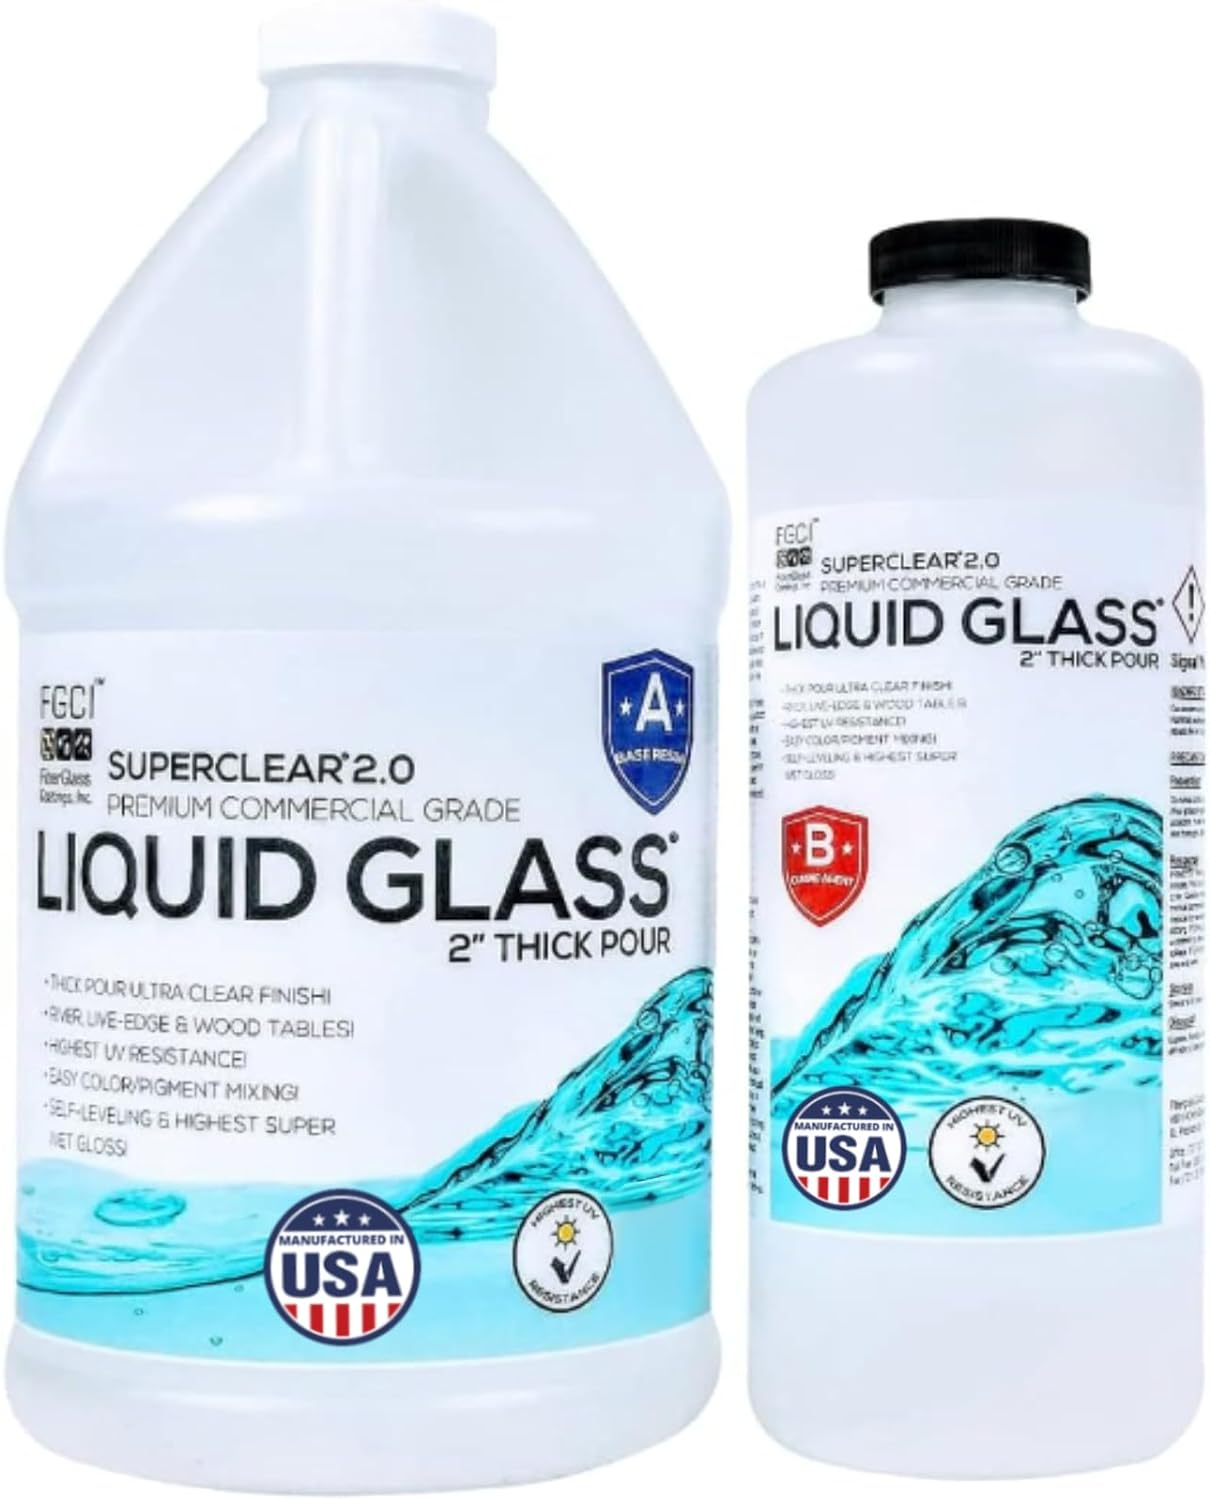 Superclear Deep Pour Epoxy Resin Kit, 0.75 Gallons - 2:1 Crystal Clear Liquid Glass Pouring up to 2-4" - Self-Leveling Food Safe Epoxy for Med $71.5